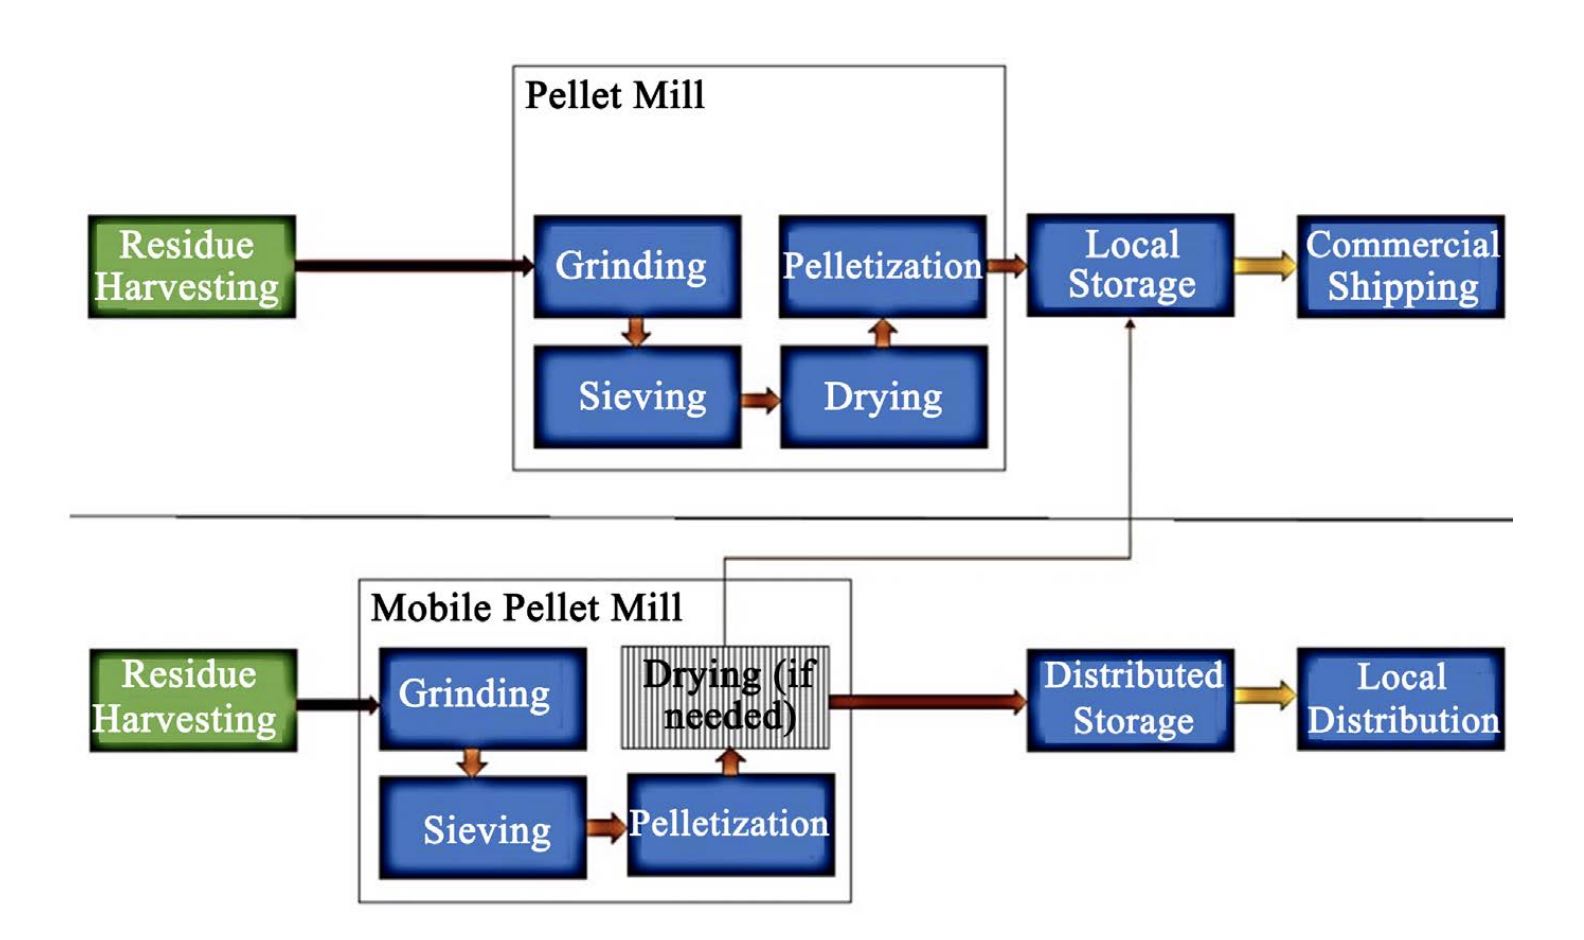 A Cost Analysis of Mobile and Stationary Pellet Mills for Mitigating Wildfire Costs by Ryan Jacobson, Shahab Sokhansanj, Dominik Roeser, Jason Hansen, Bhushan Gopaluni, Xiaotao Bi